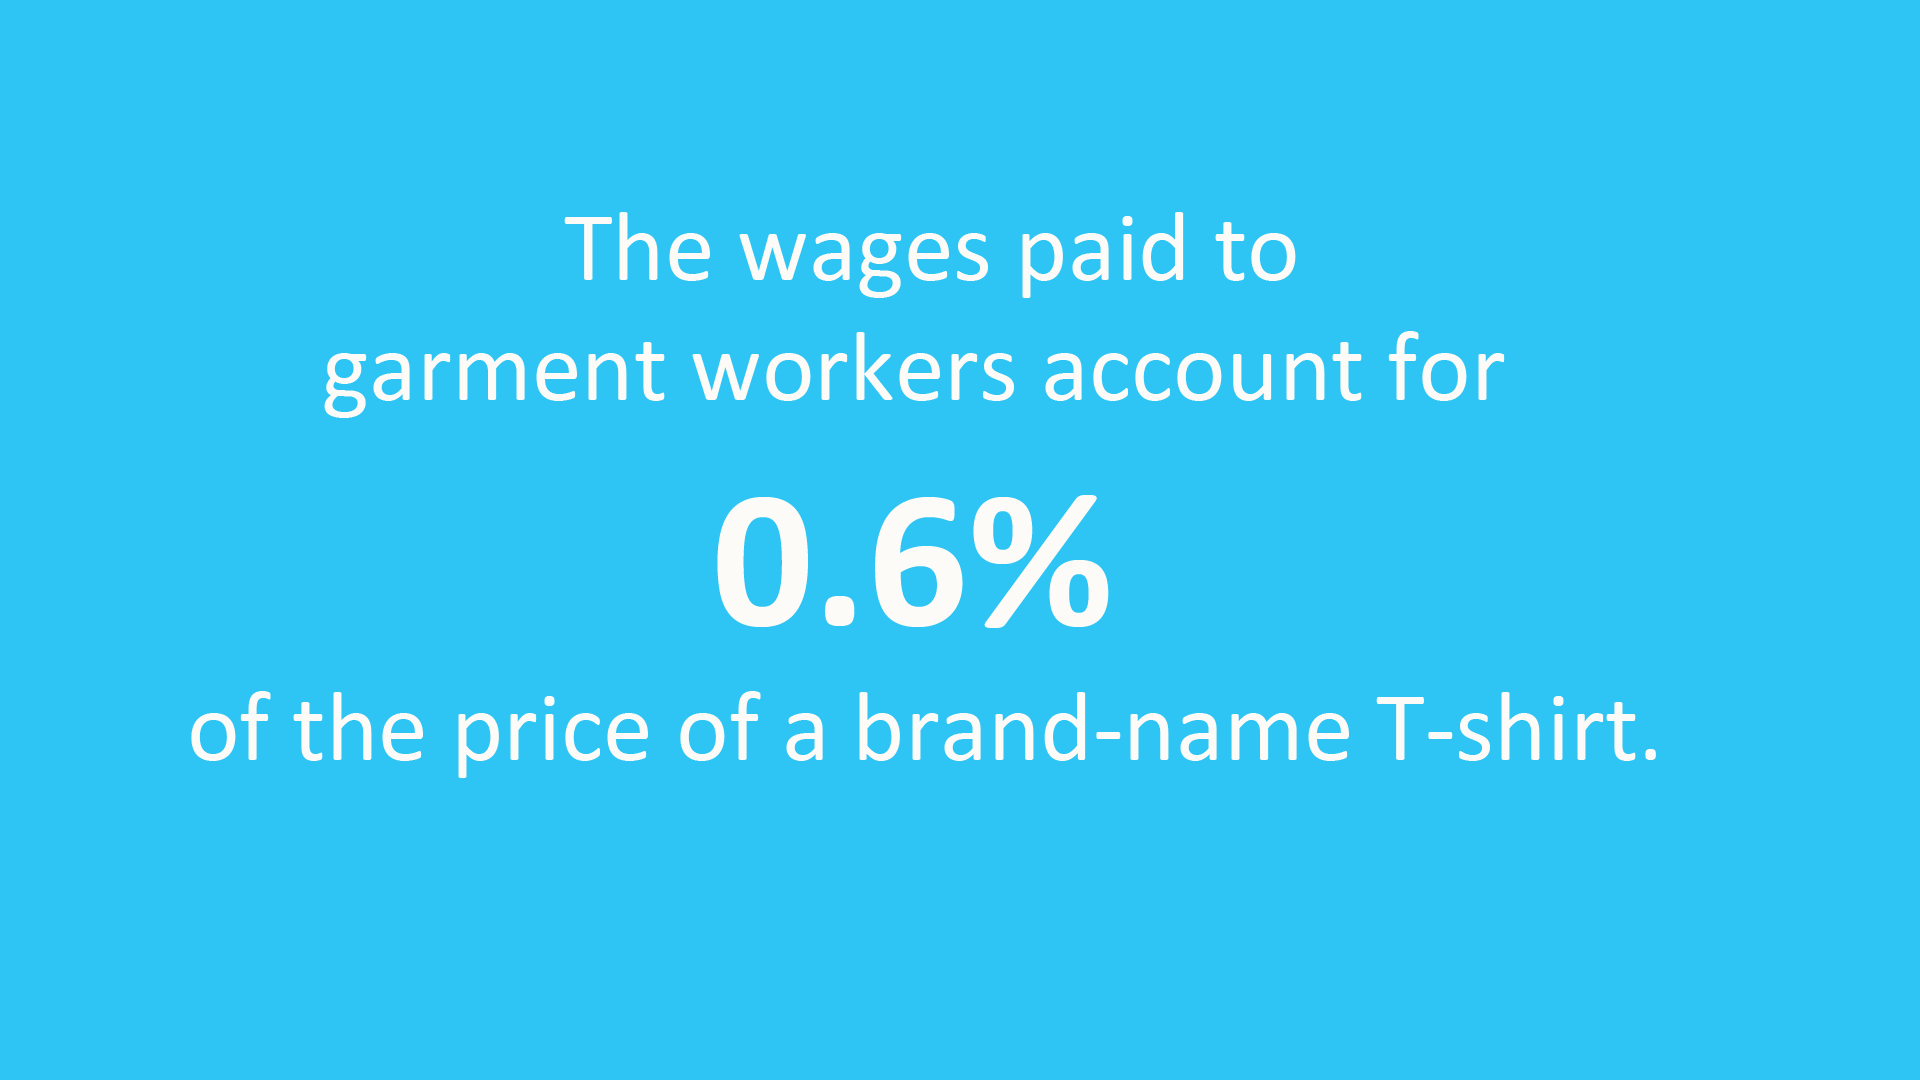 The wages paid to garment workers account for 0.6 per cent of the price of a brand-name T-shirt.